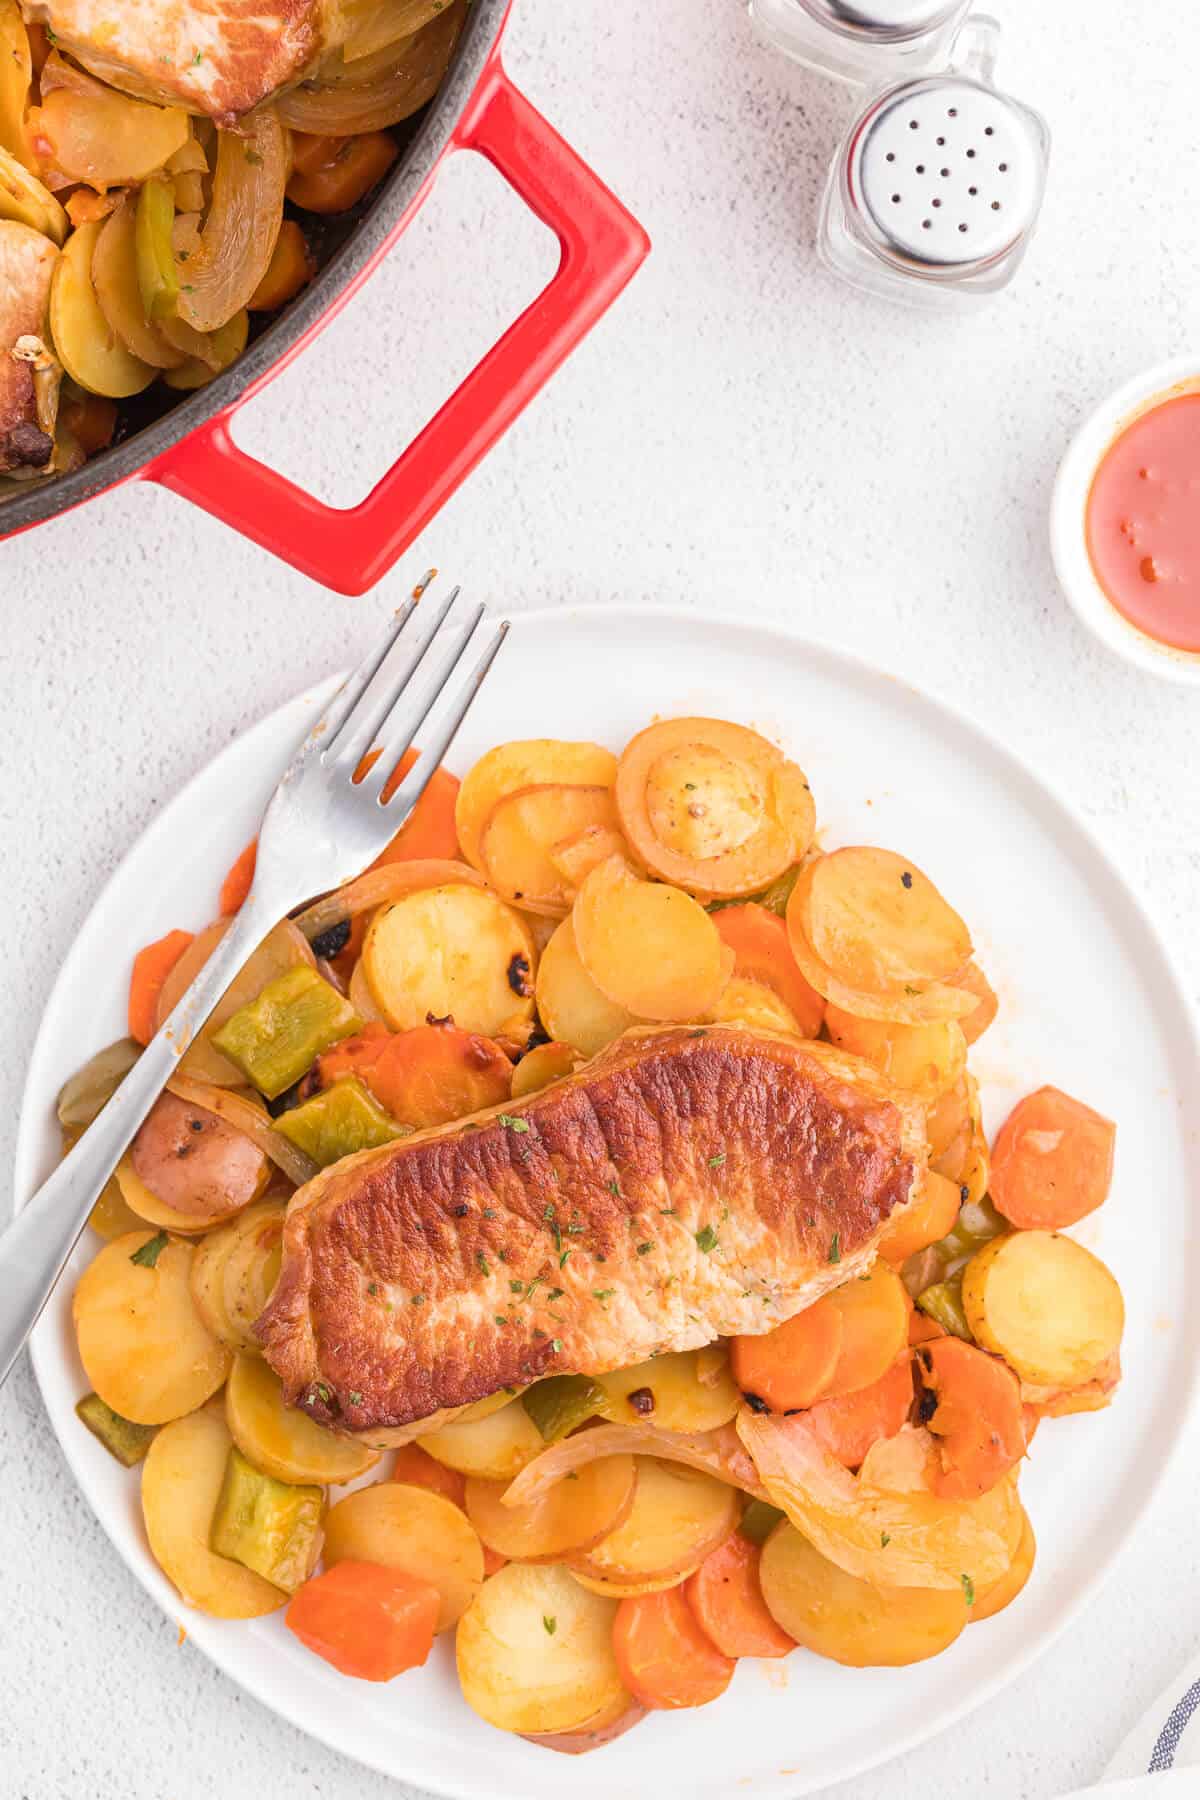 Pork Chop Skillet Dinner Recipe - A simple and delicious one-pan meal! Pork chops are cooked to perfection with potatoes, carrots, onions and green pepper in a tomato sauce with a kick.